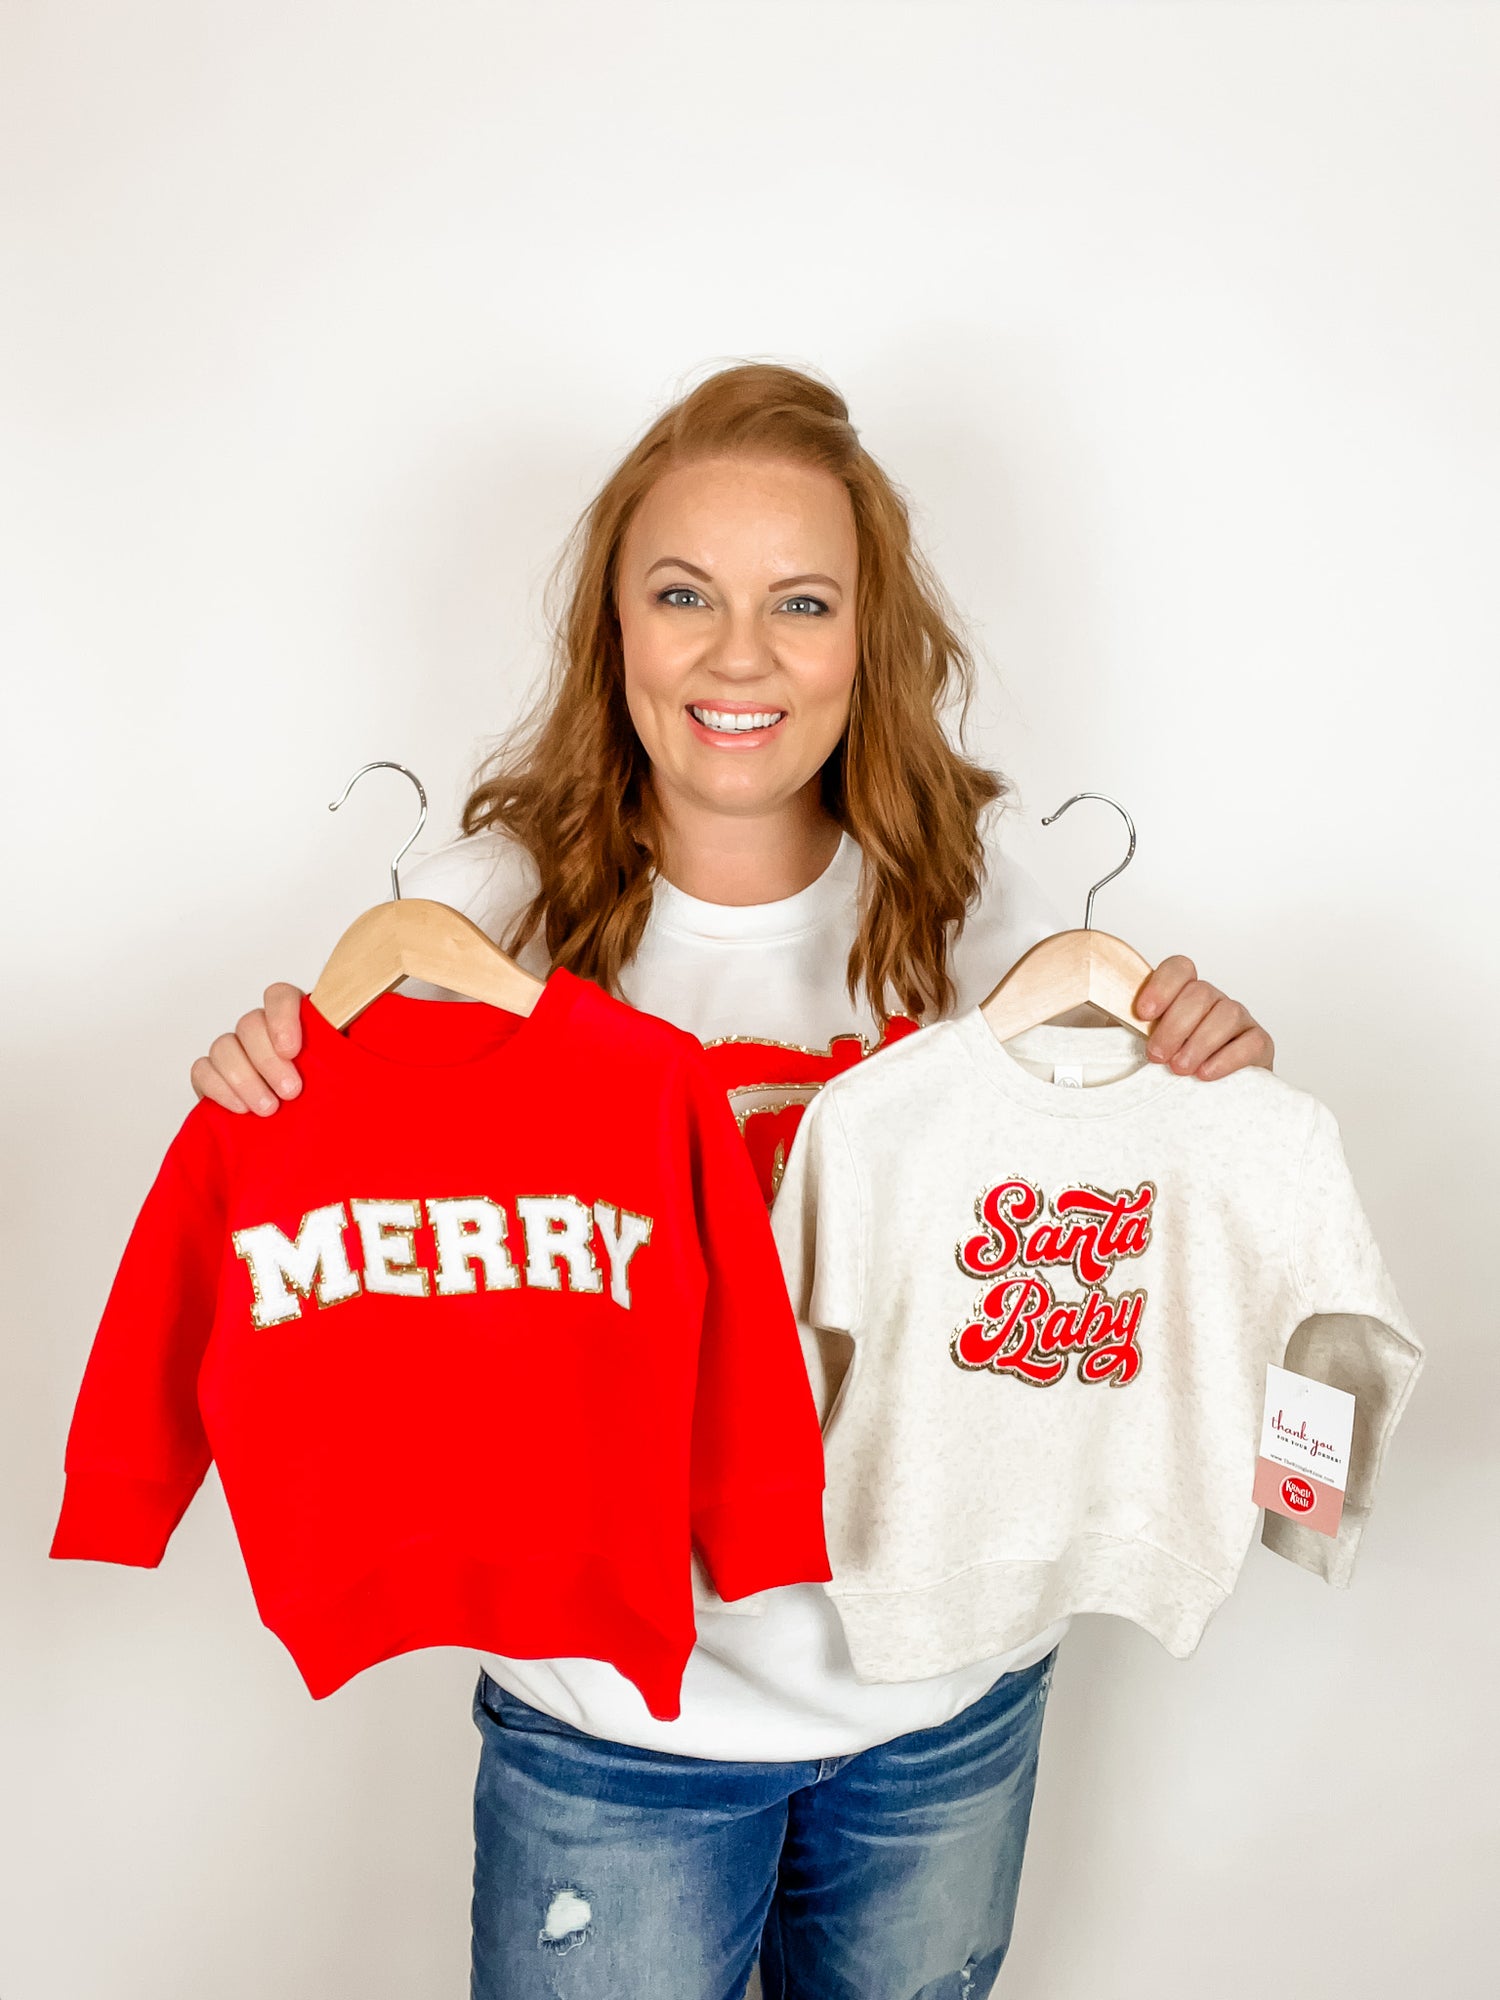 Abby Robertson, owner of the Kringle Krate Boutique holds two toddler sweatshirts in red and beige that feature chenille patches reading "Merry" and "Santa Baby."